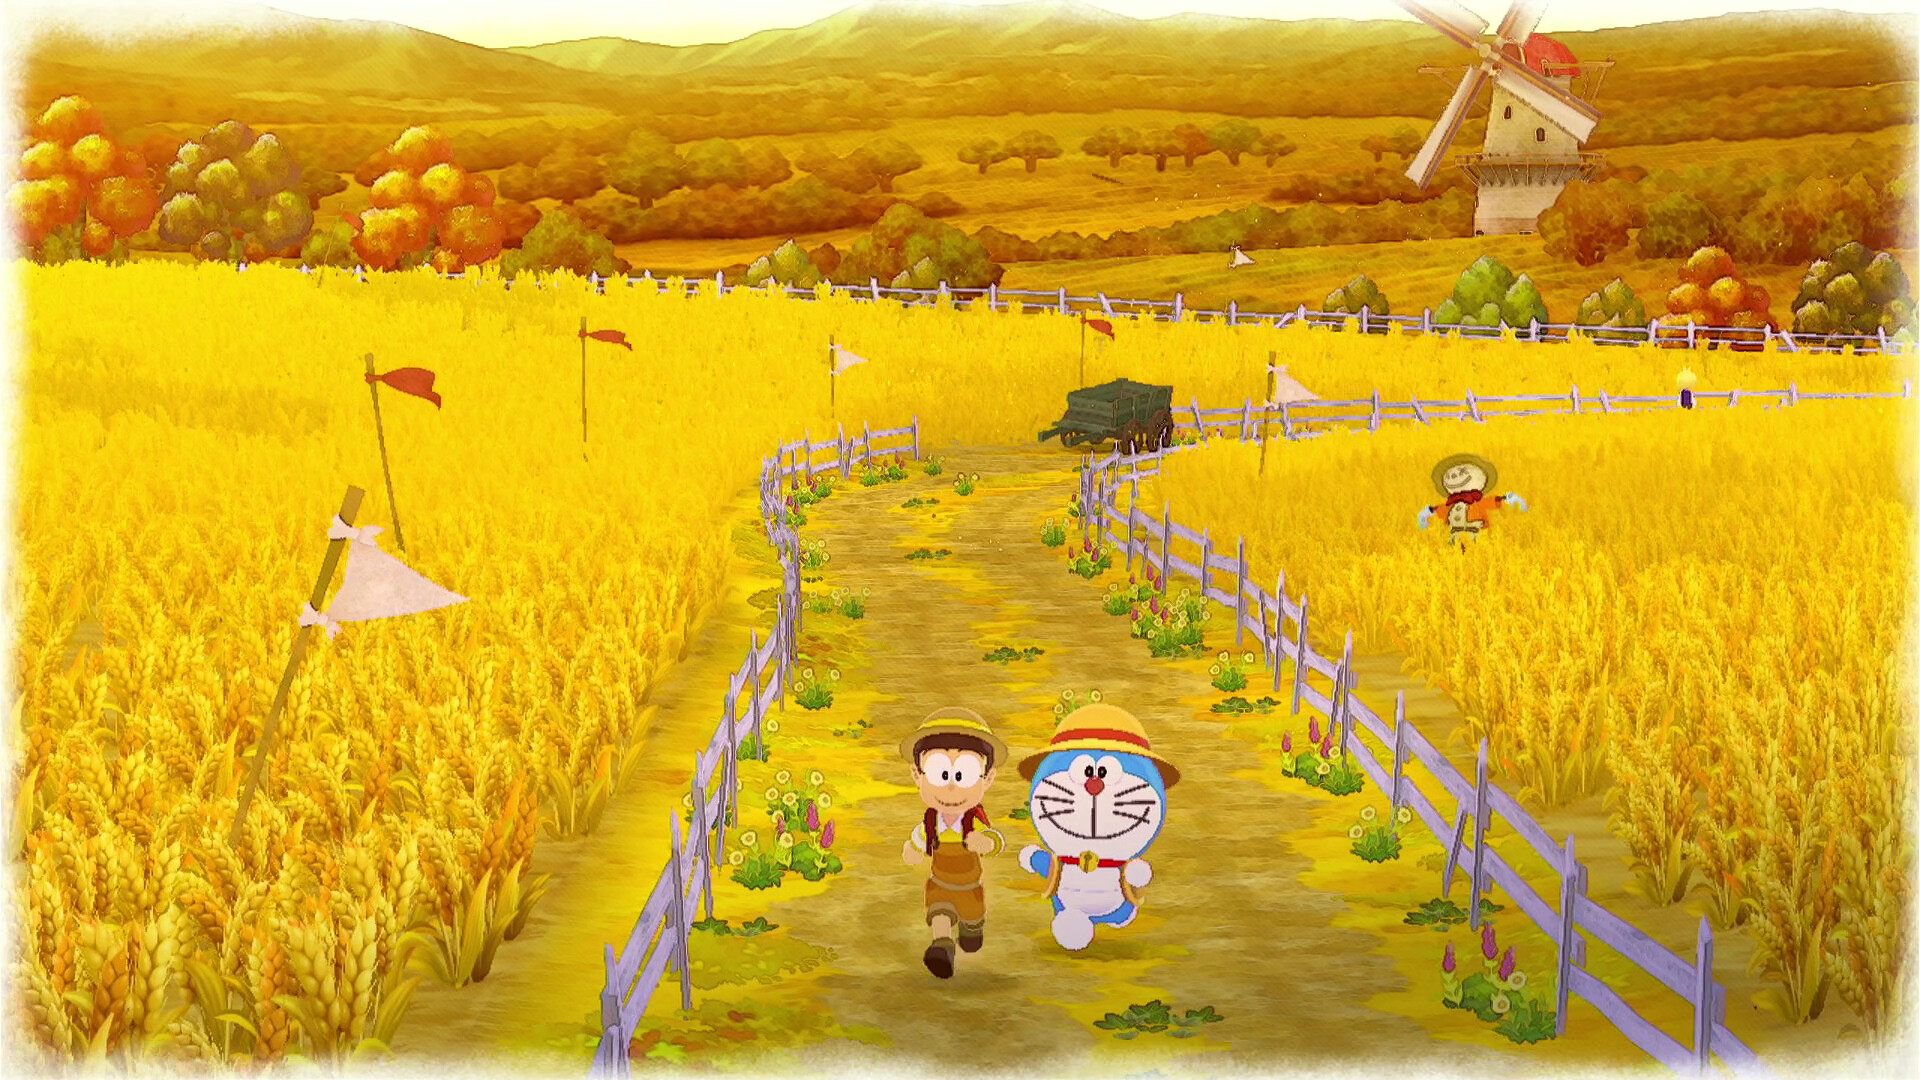 DORAEMON STORY OF SEASONS: Friends of the Great Kingdom Free Download